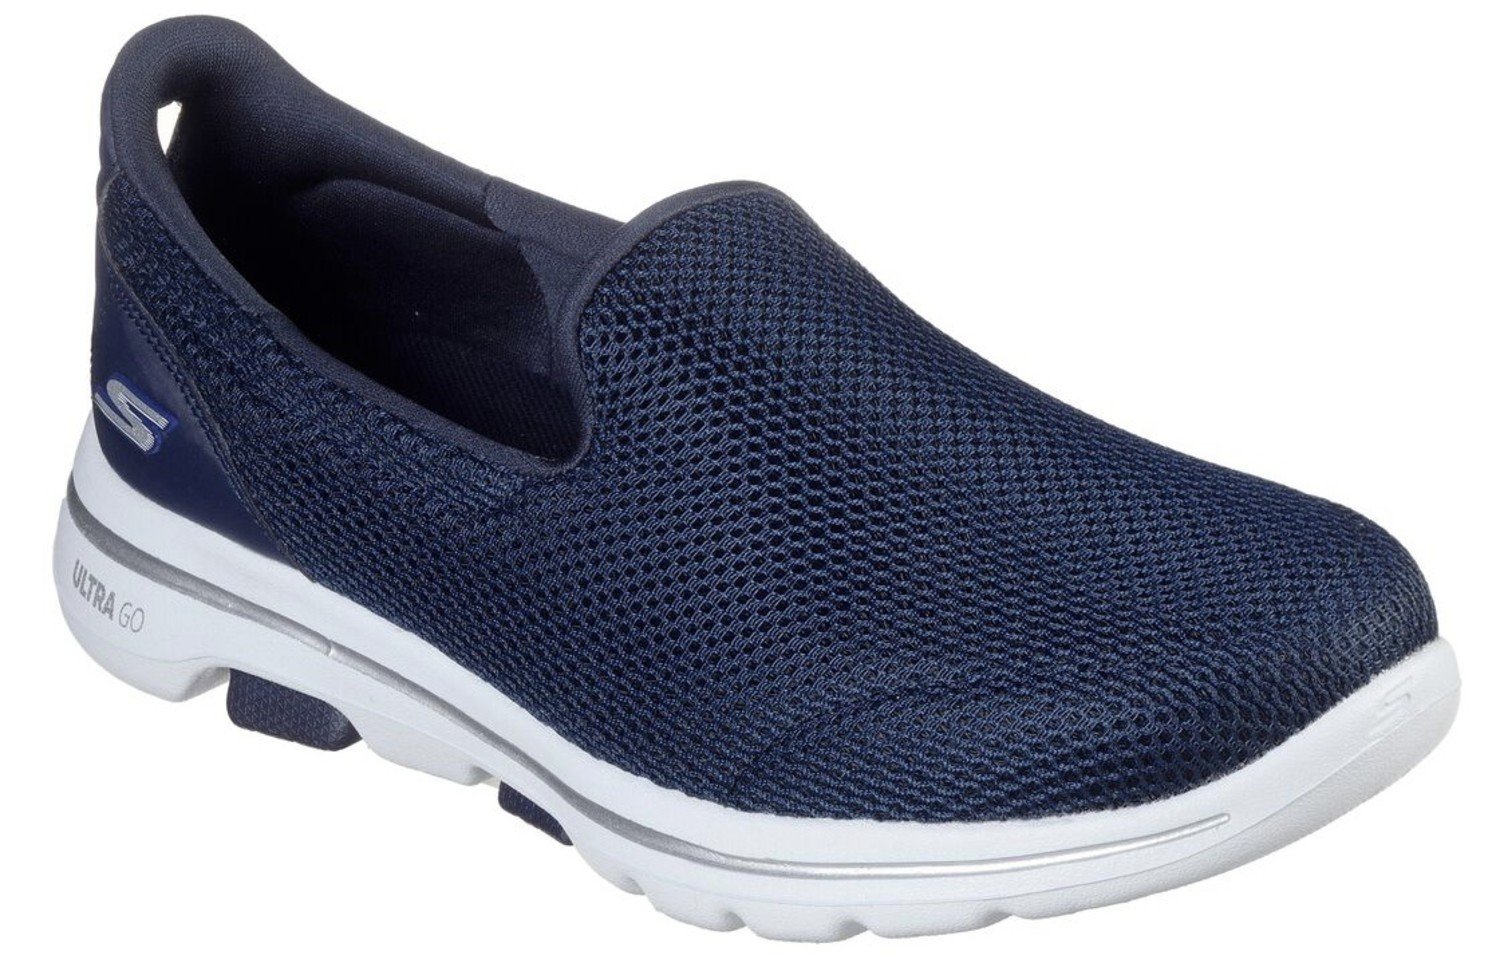 Skechers Go Walk Navy - Continental Shoes